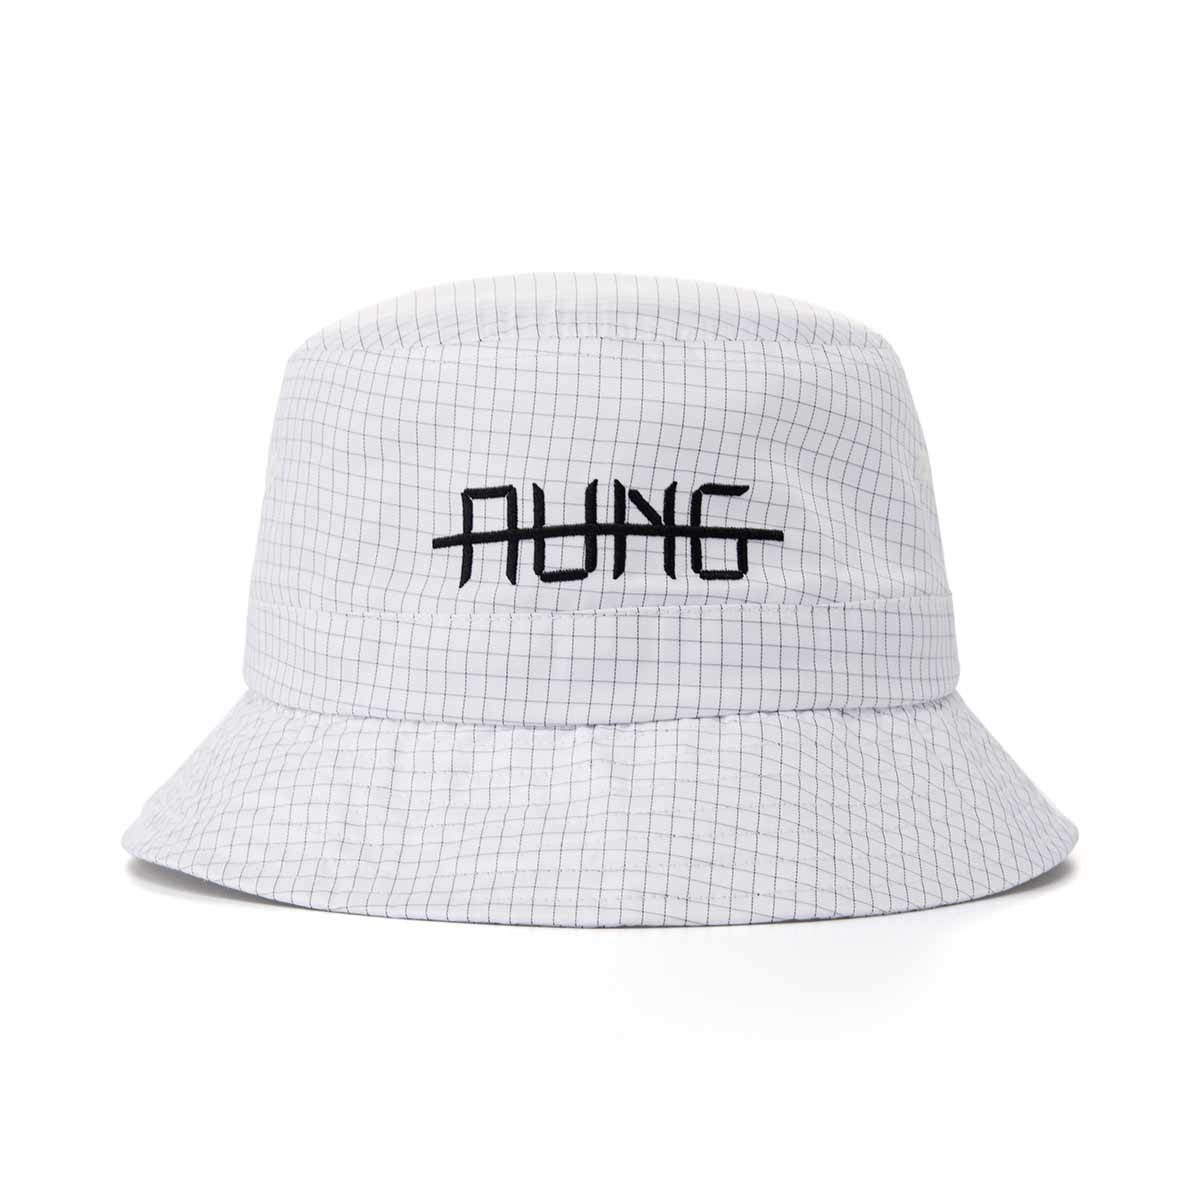 Aung-Crown-all-white-bucket-hat-SFG-210429-8